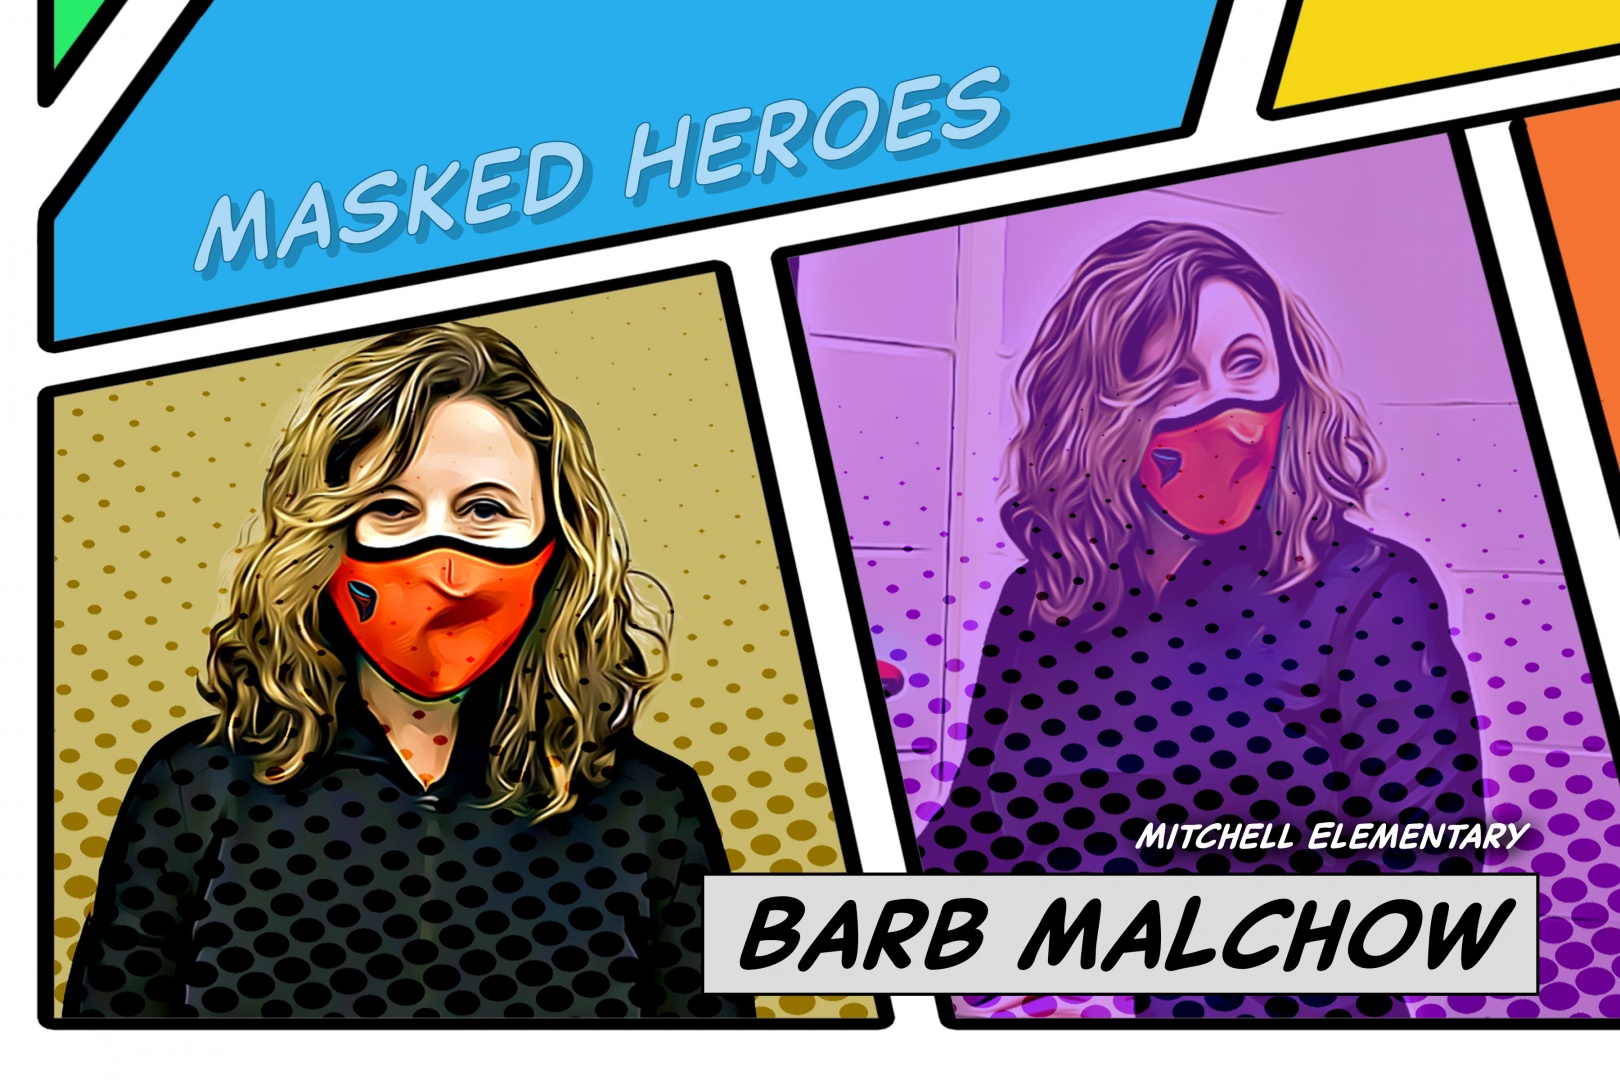 Masked Hero: Barb Malchow